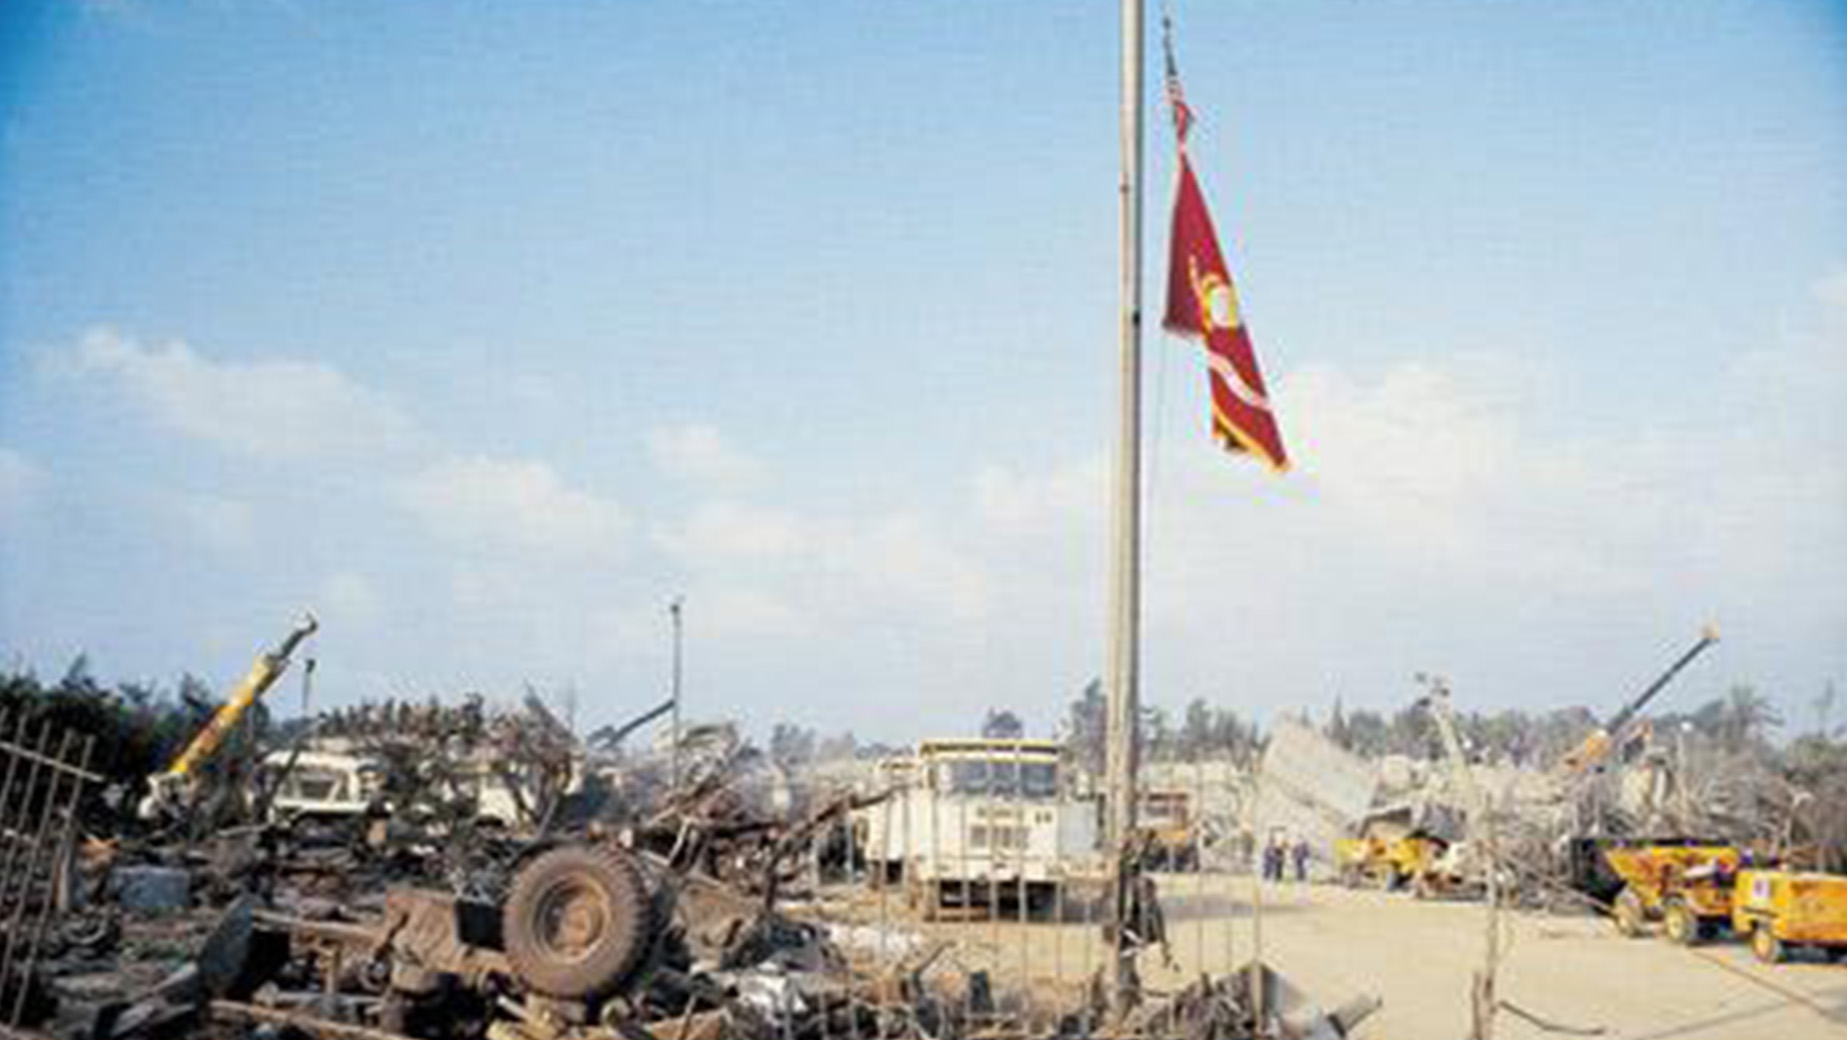 The US Marine barracks in Beirut, Lebanon lays in ruins after the bombing. Department of Defense